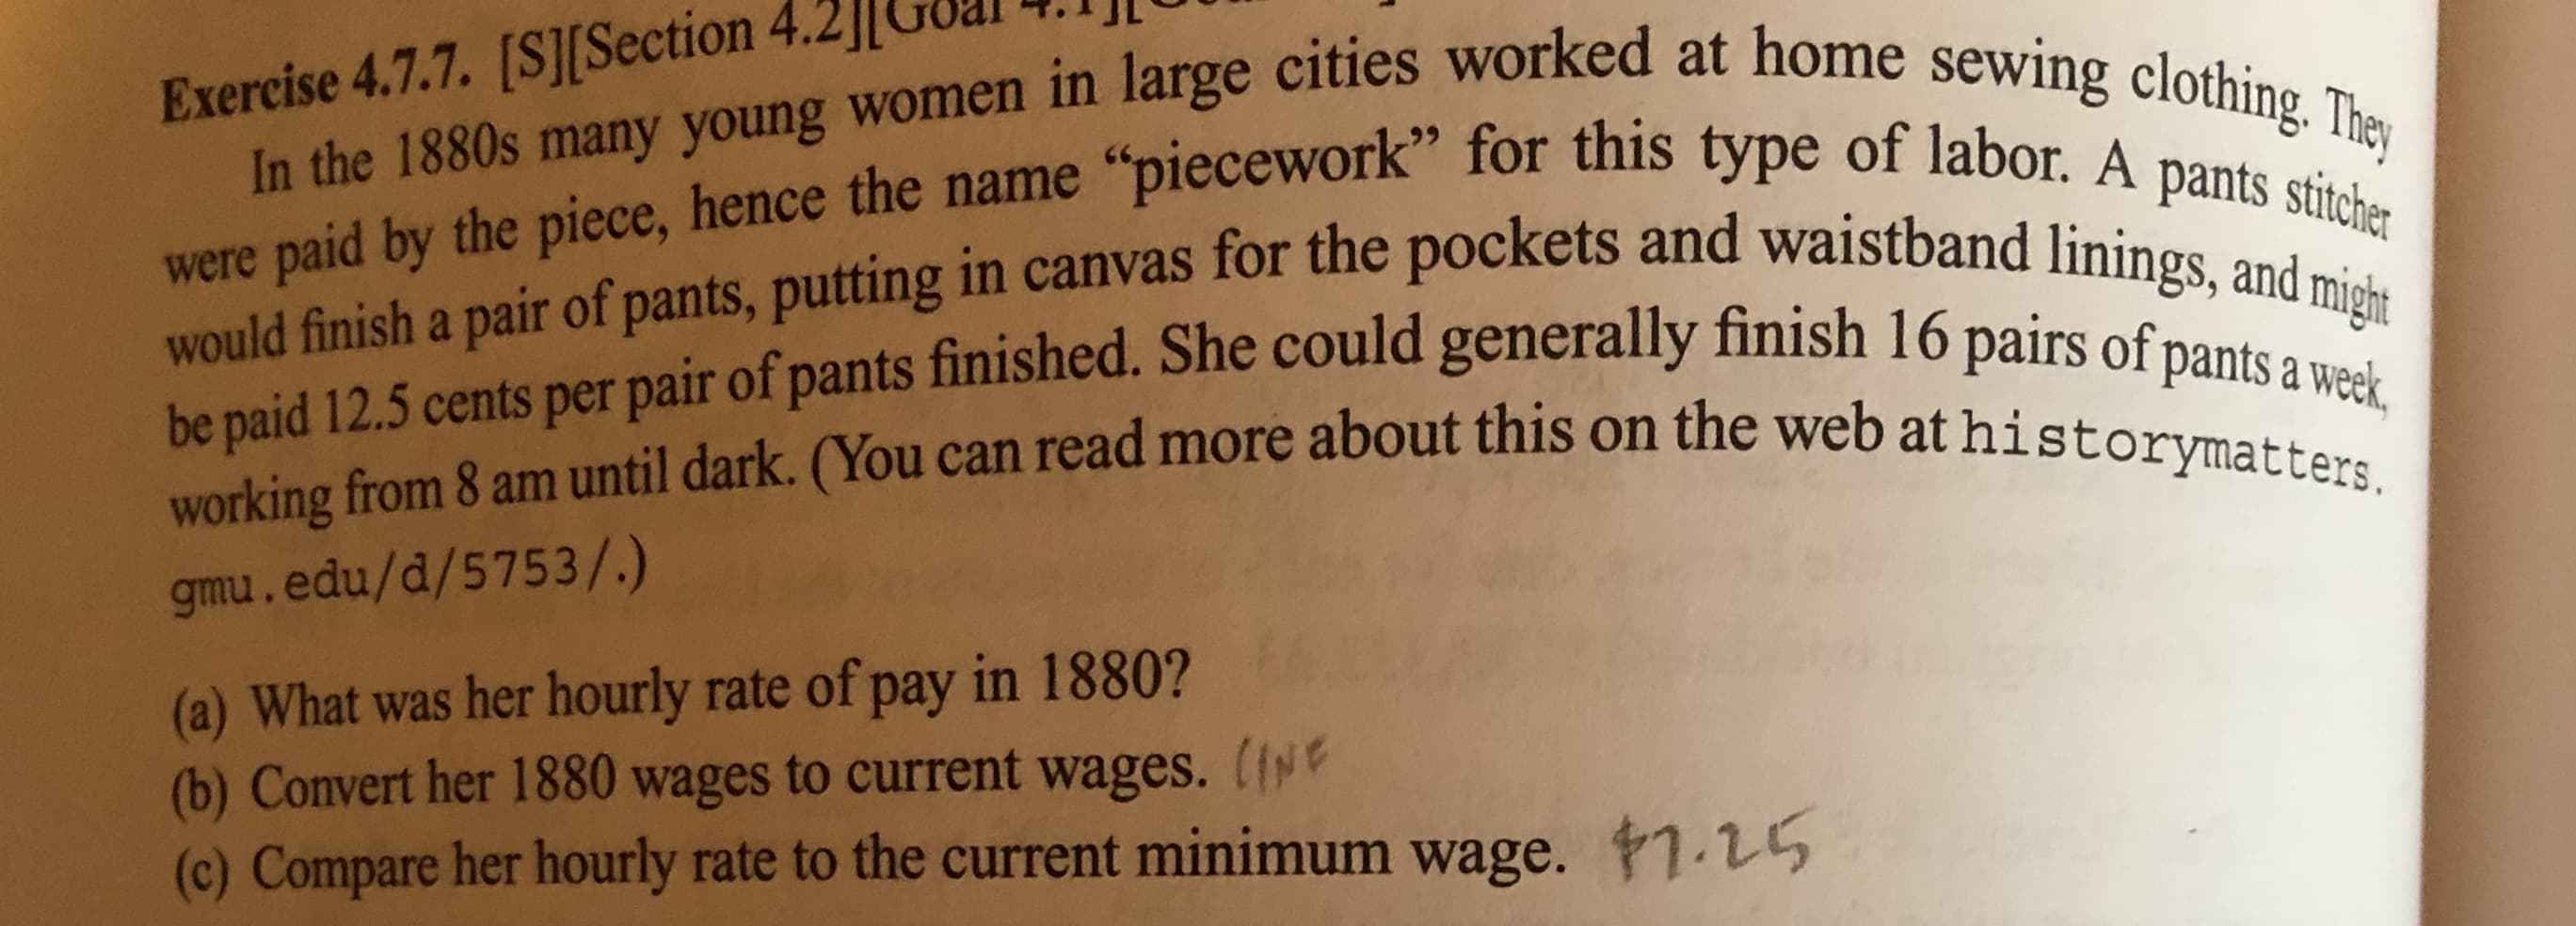 In the 1880s many young women in large cities worked at home
were paid by the piece, hence the name piecework" for this
would finish a pair of pants, putting in canv
be paid 12.5 cents per pair of pants finished. She could generally finish 16 pai
working from 8 am until dark. (You can read more about this on the web at histo
gmu.edu/d/5753/.)
Exercise 4.7.7. [SJ[Section 4.2lGoal I]l
citie
type of labor. A pants stitchr
as for the pockets and waistband linings, and m
of pants a week
tymters
(a) What was her hourly rate of pay in 1880?
(b) Convert her 1880 wages to current wages. (i
(c) Compare her hourly rate to the current minimum wage. #1.15
